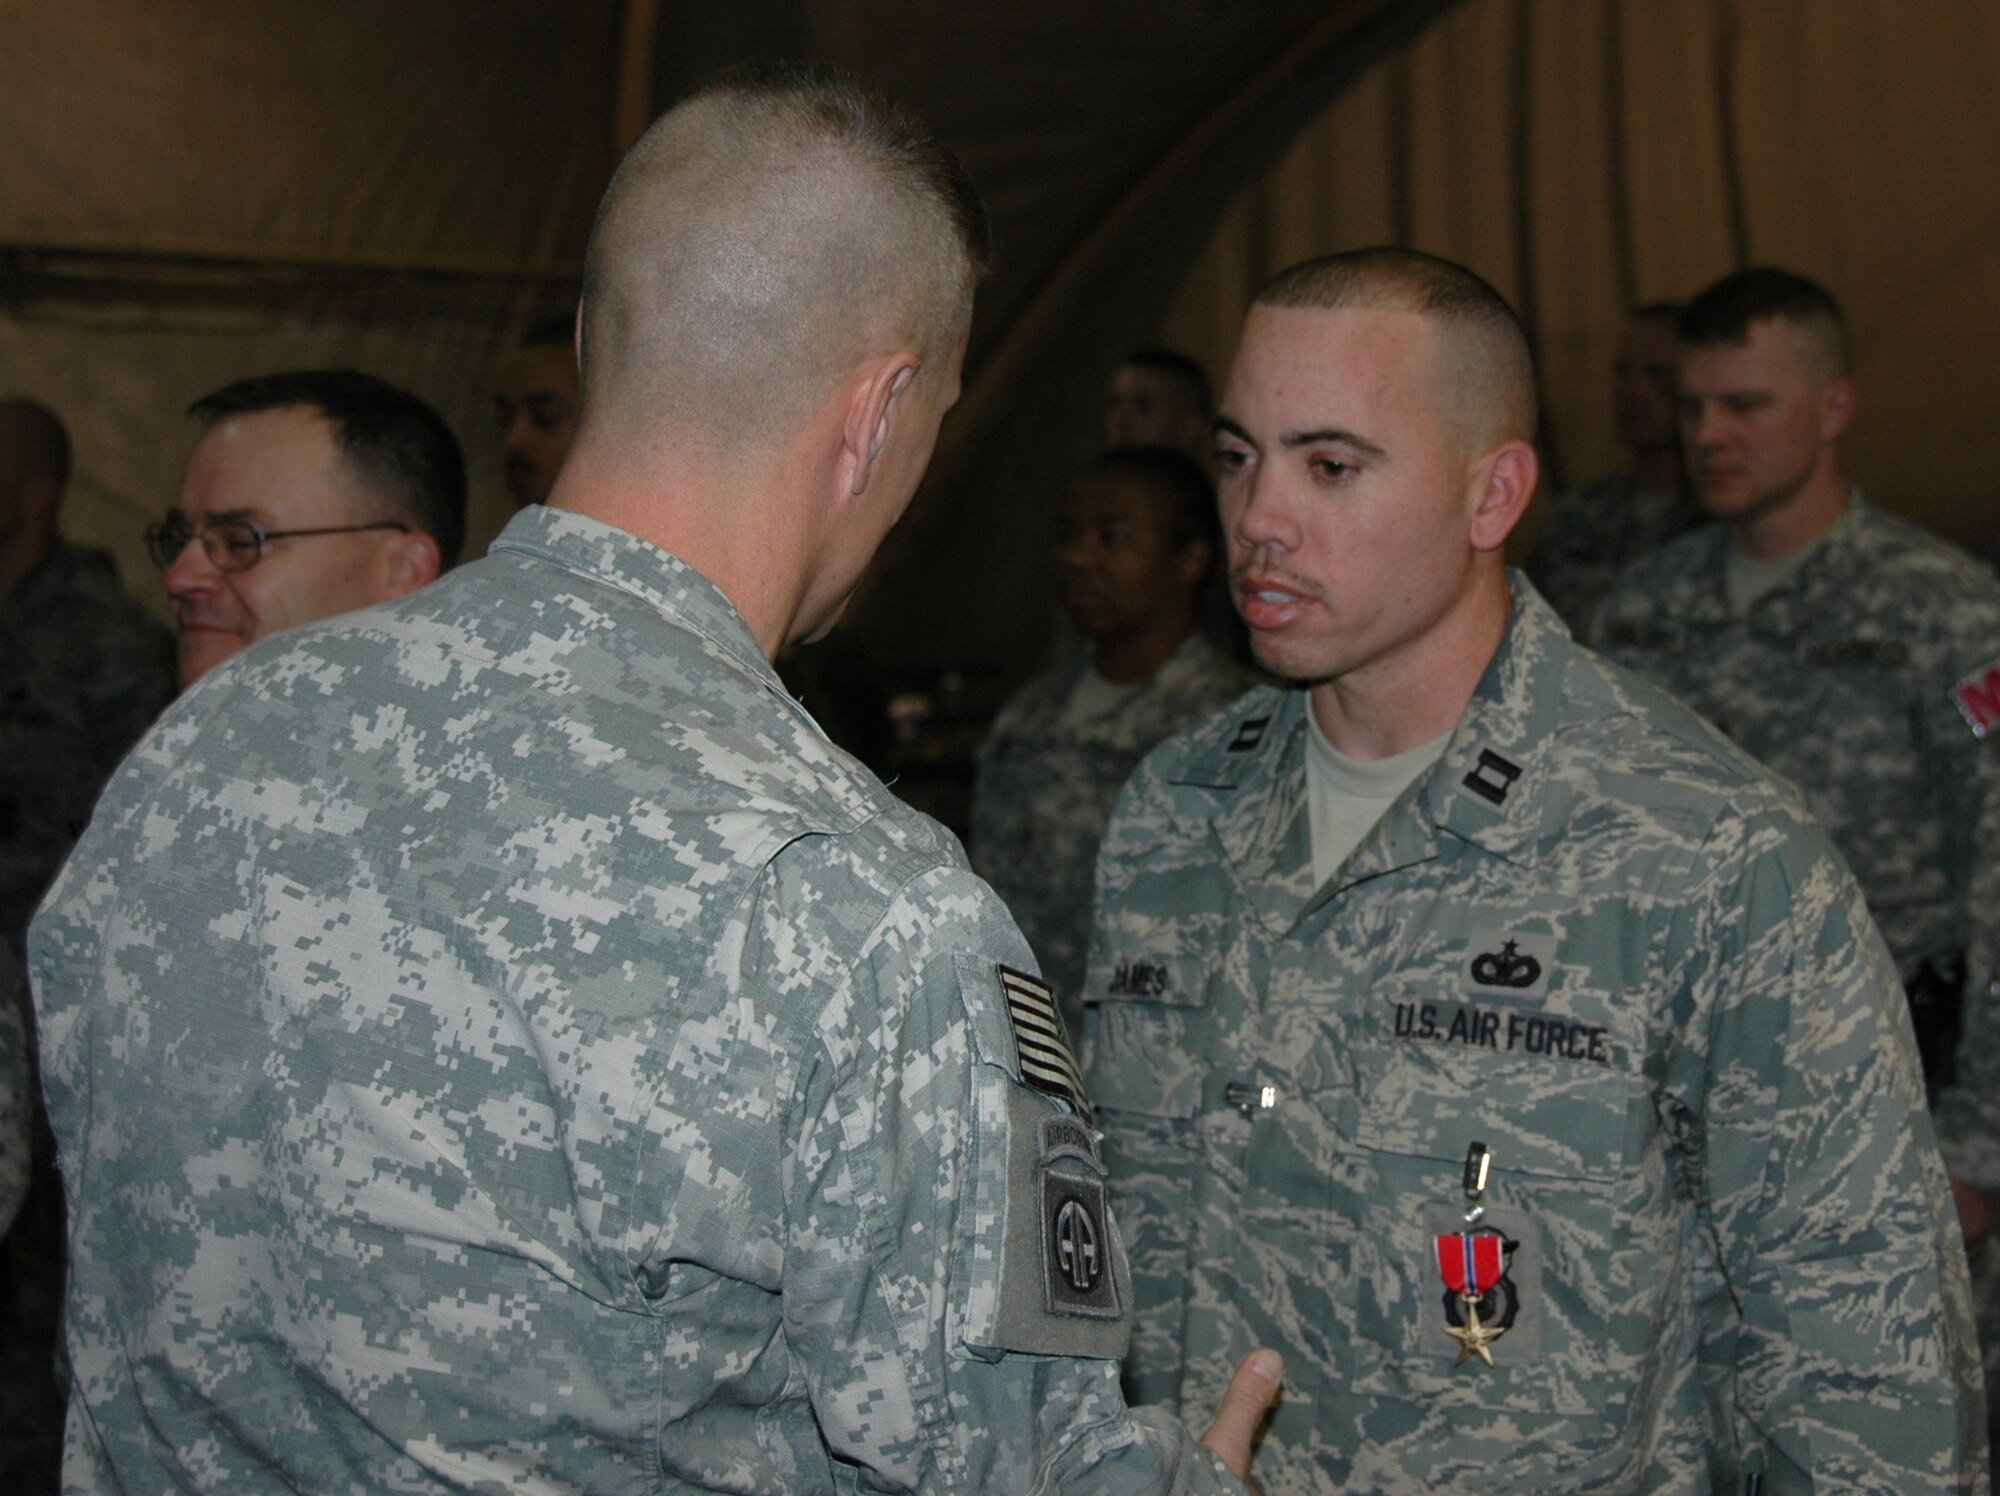 Capt. Joshua James deployed to South West Asia from Whiteman Air Force Base recently earned a Bronze Star. (Photo printed with permission of Chief Master Sergeant Robert Rush)